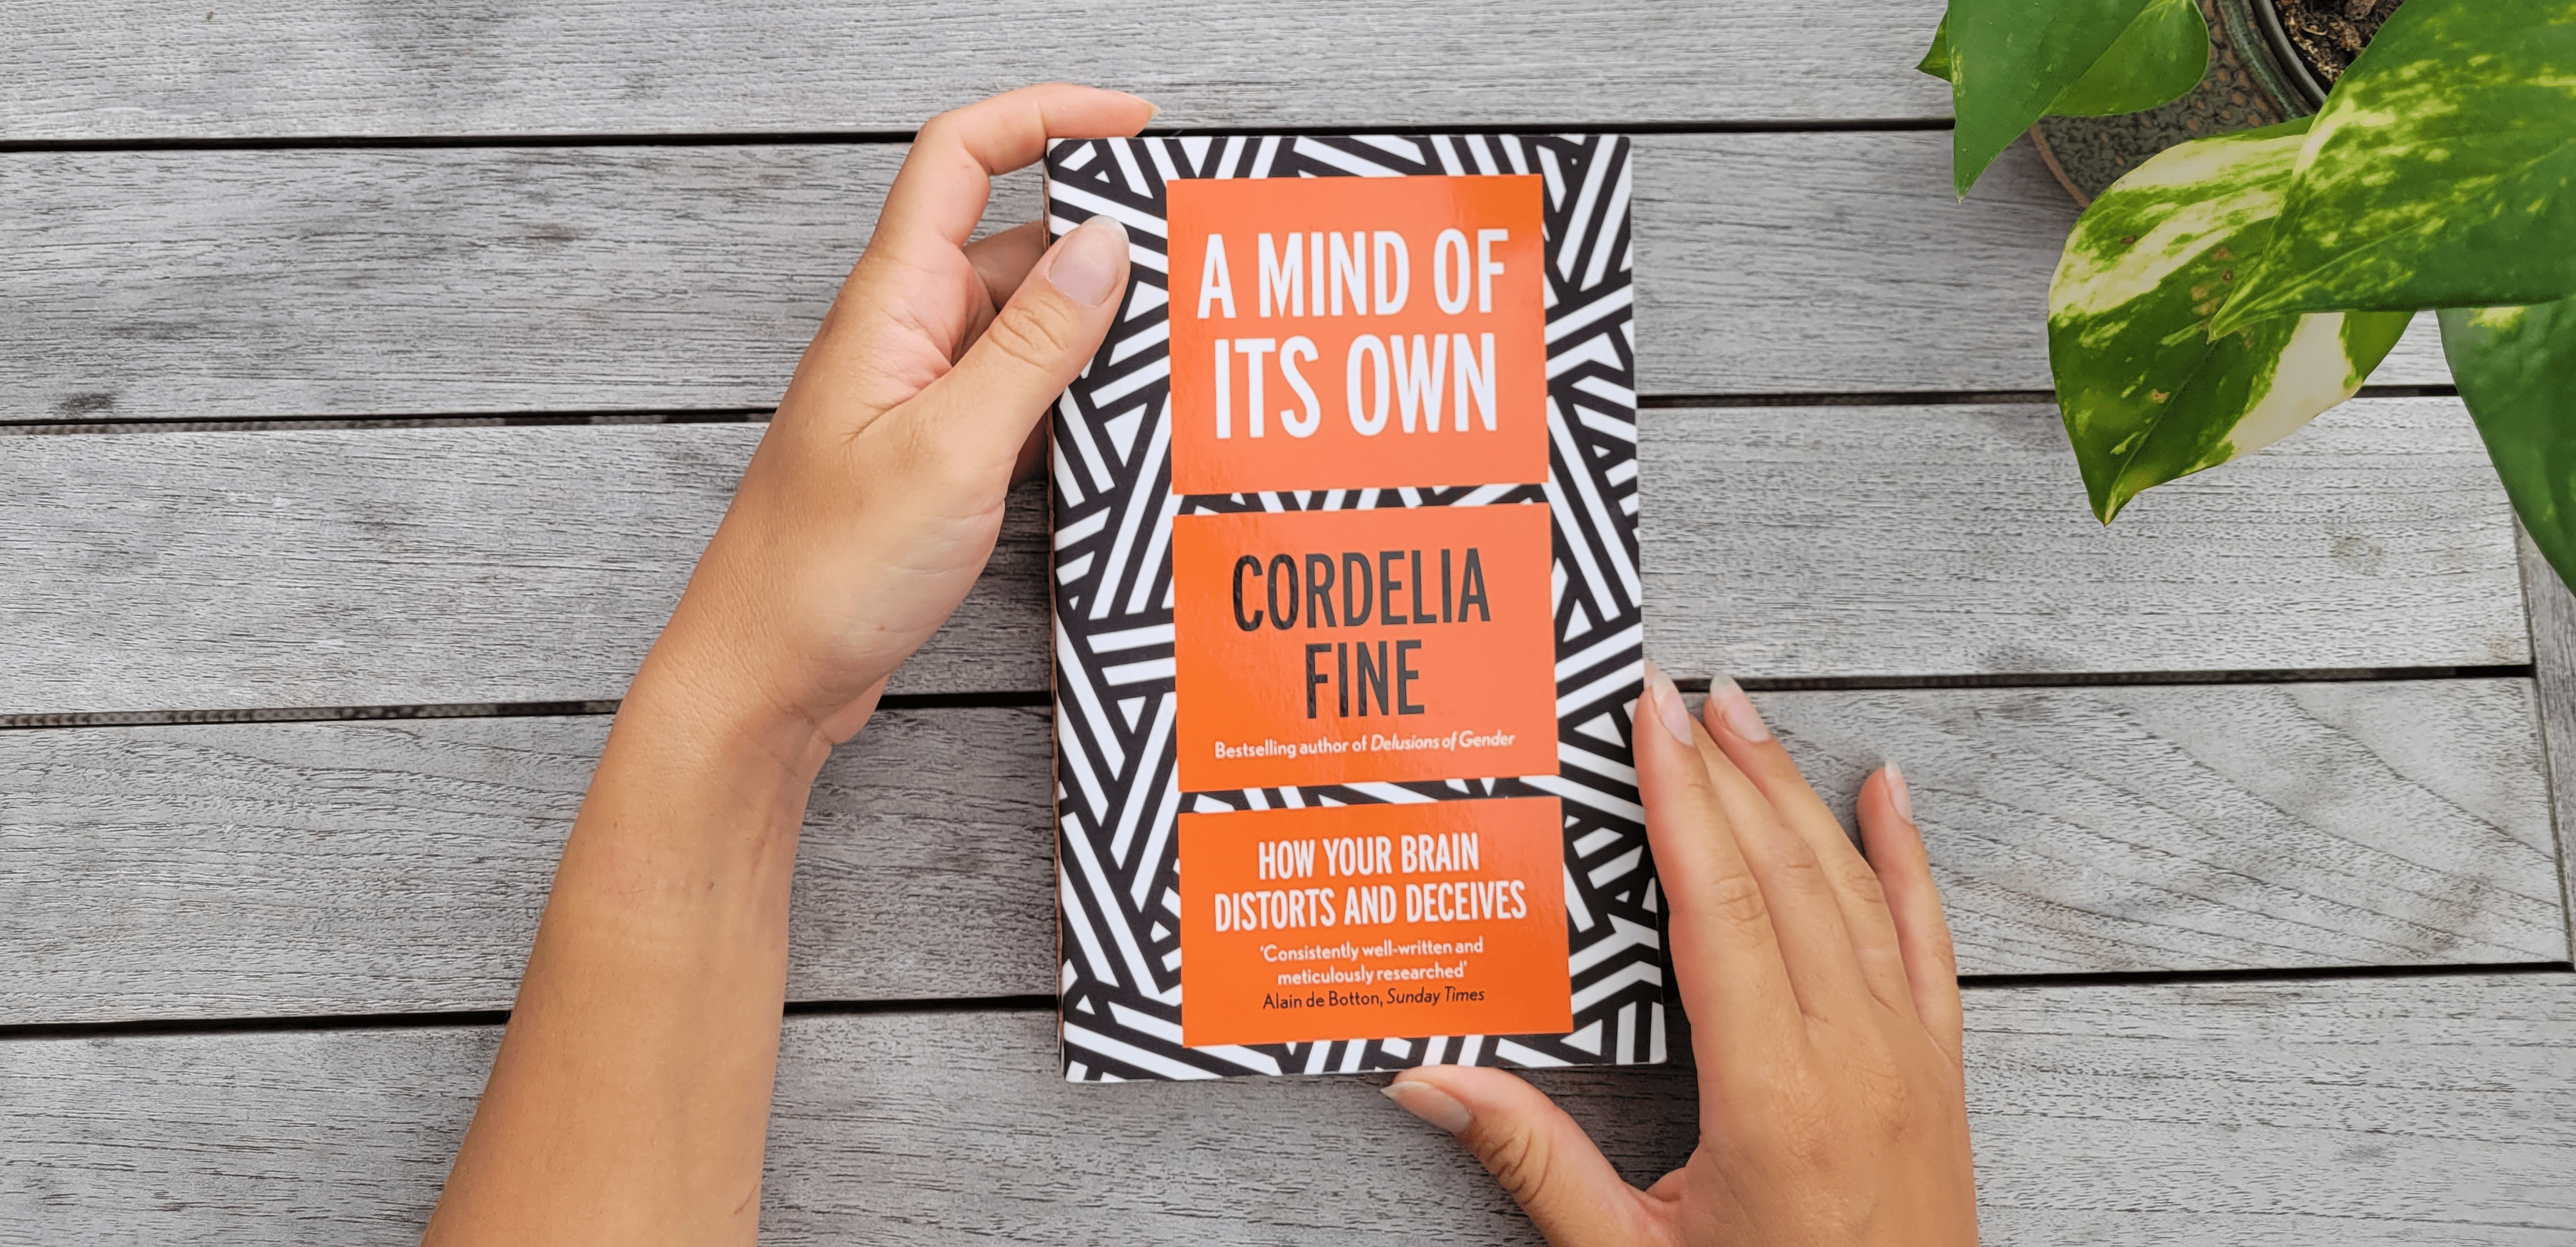 Summary – A Mind of Its Own: How Your Brain Distorts and Deceives by Cordelia Fine